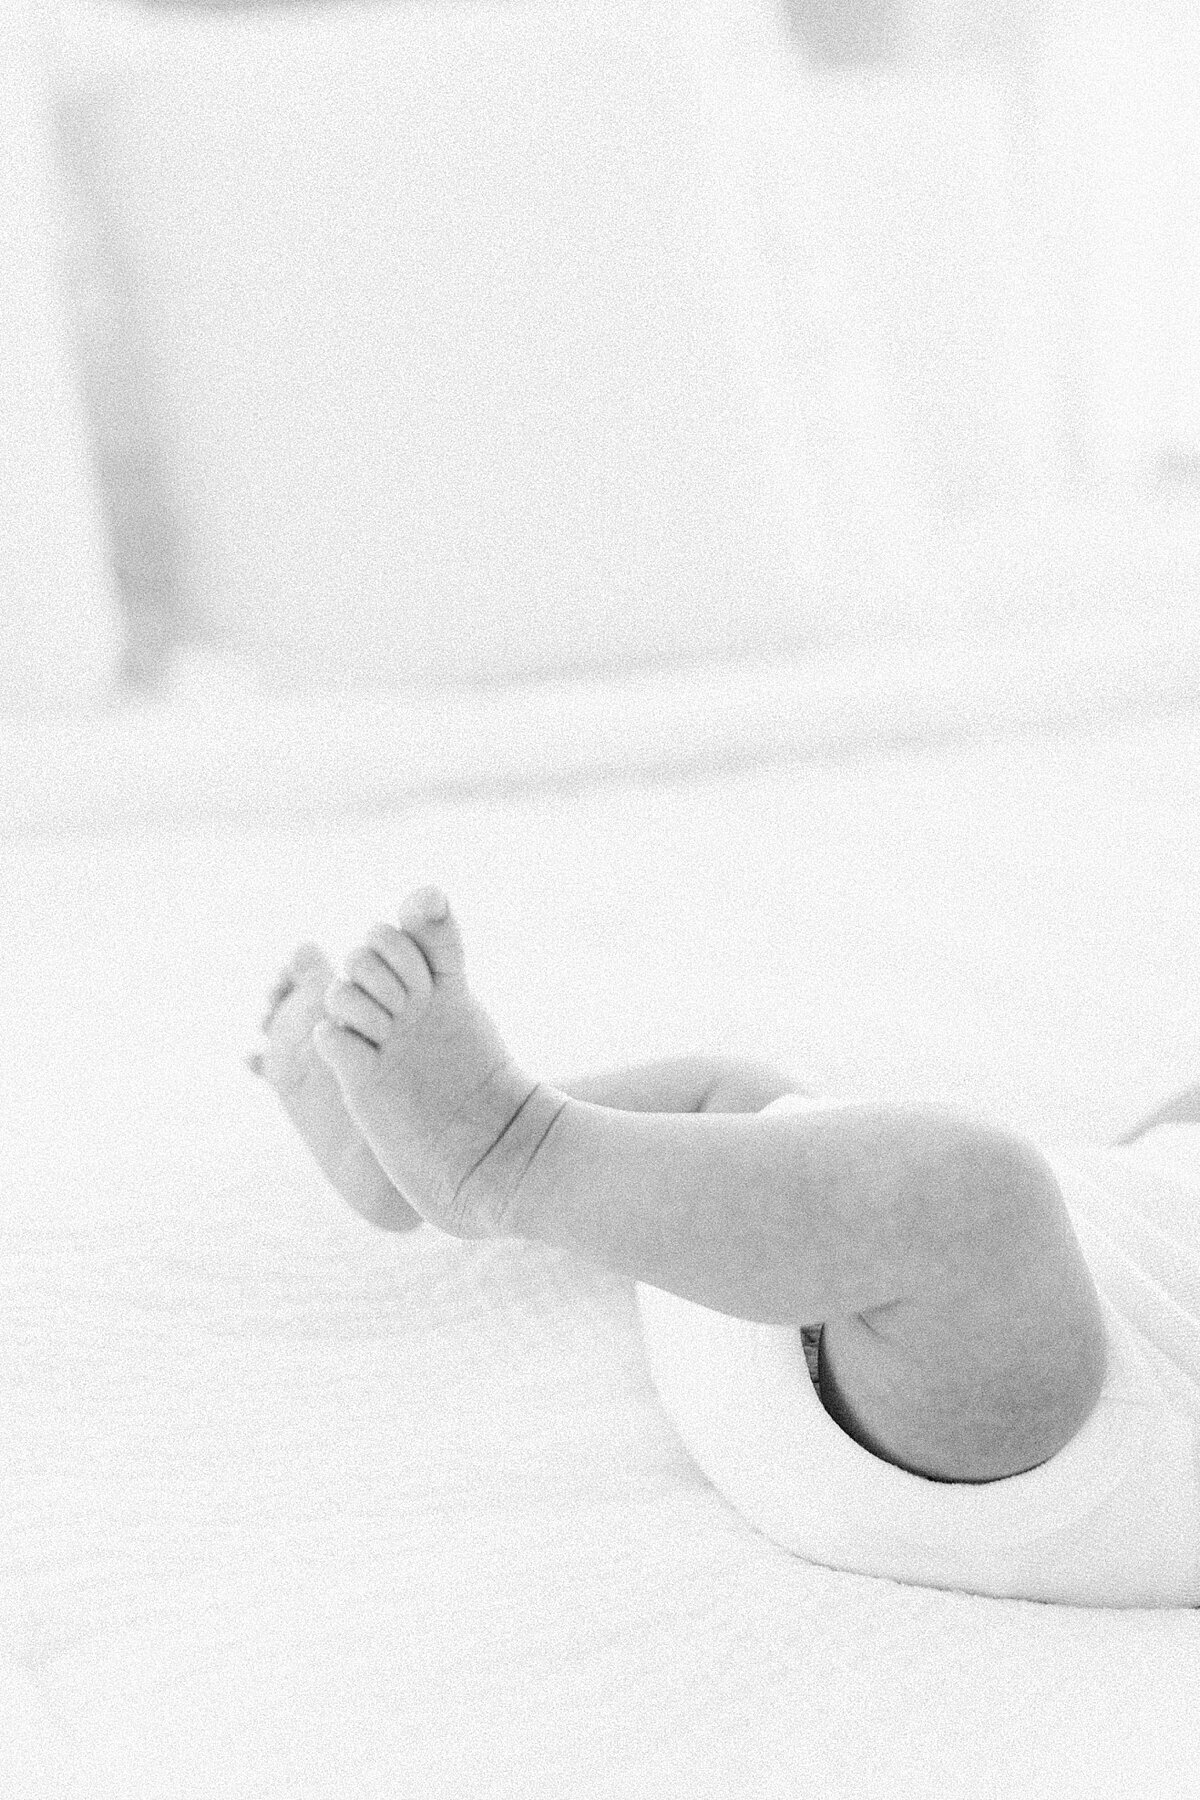 in-home-lifestyle-session-charleston-newborn-photographer-caitlyn-motycka-photography_0003